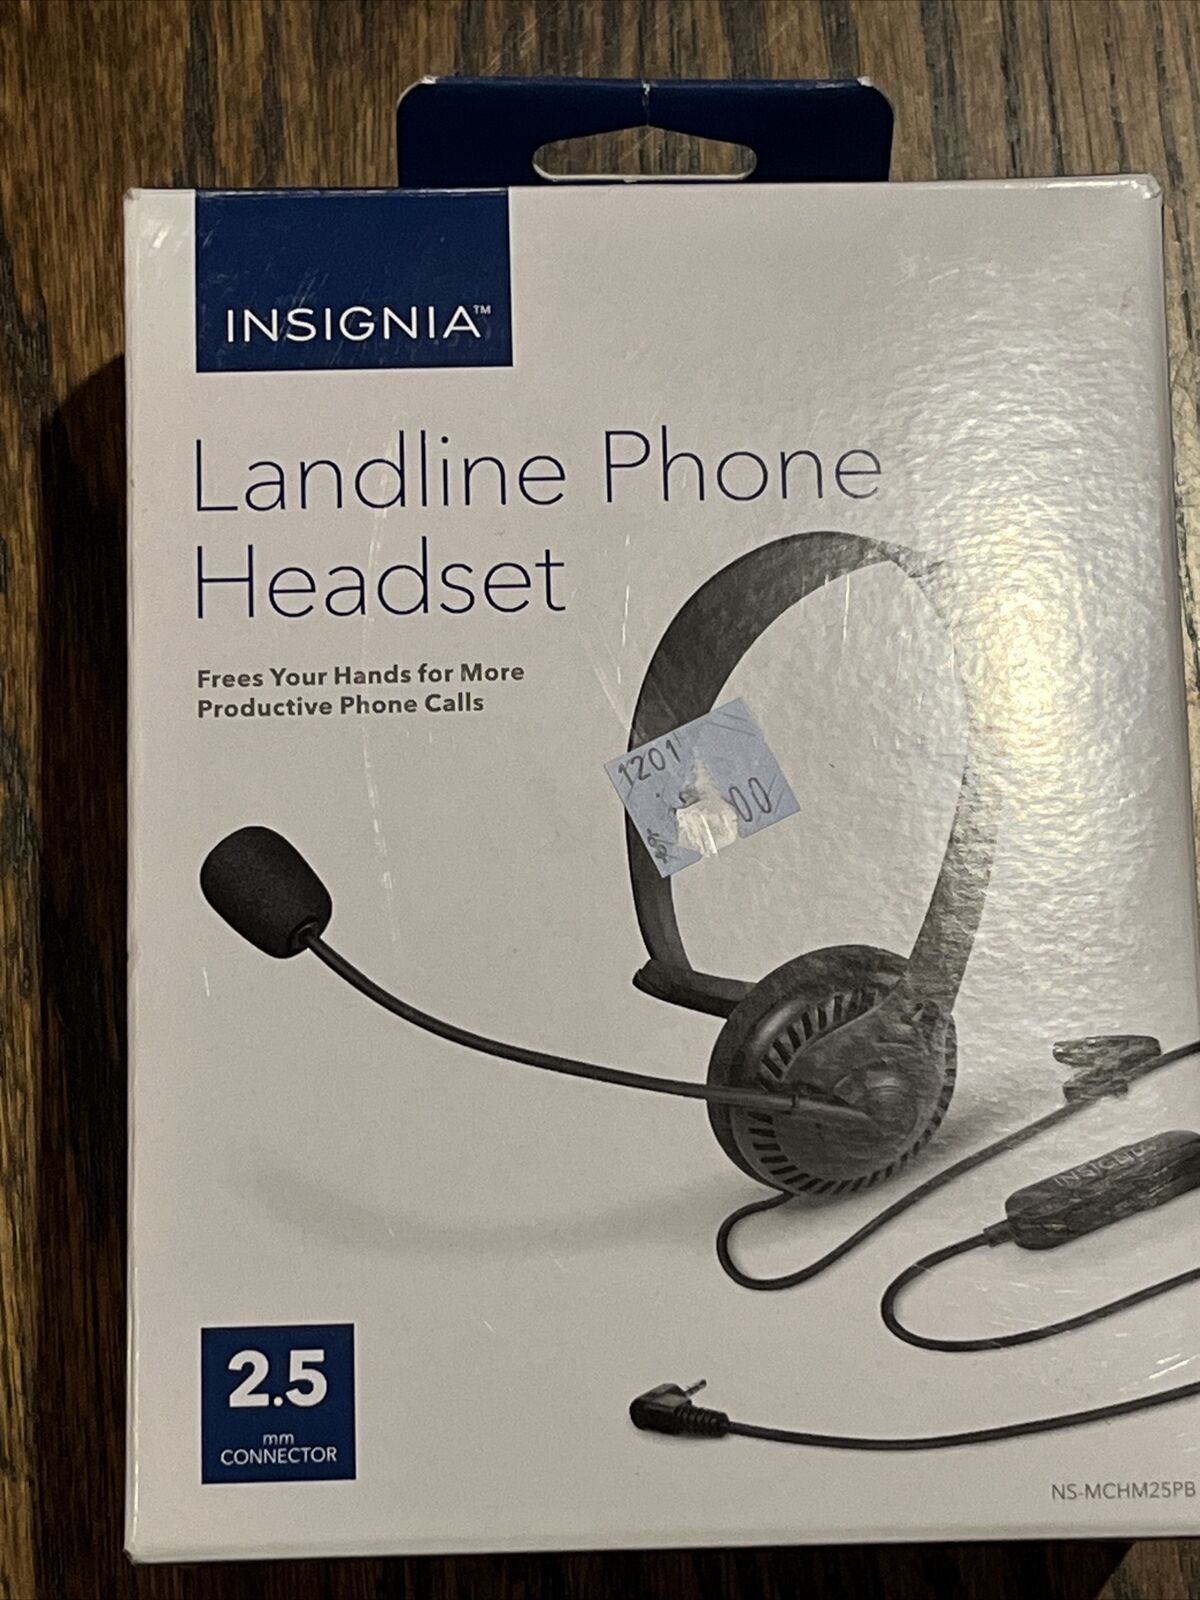 Insignia Landline Phone Headset  HANDS FREE 2.5 Connector NS-MCHM25PB